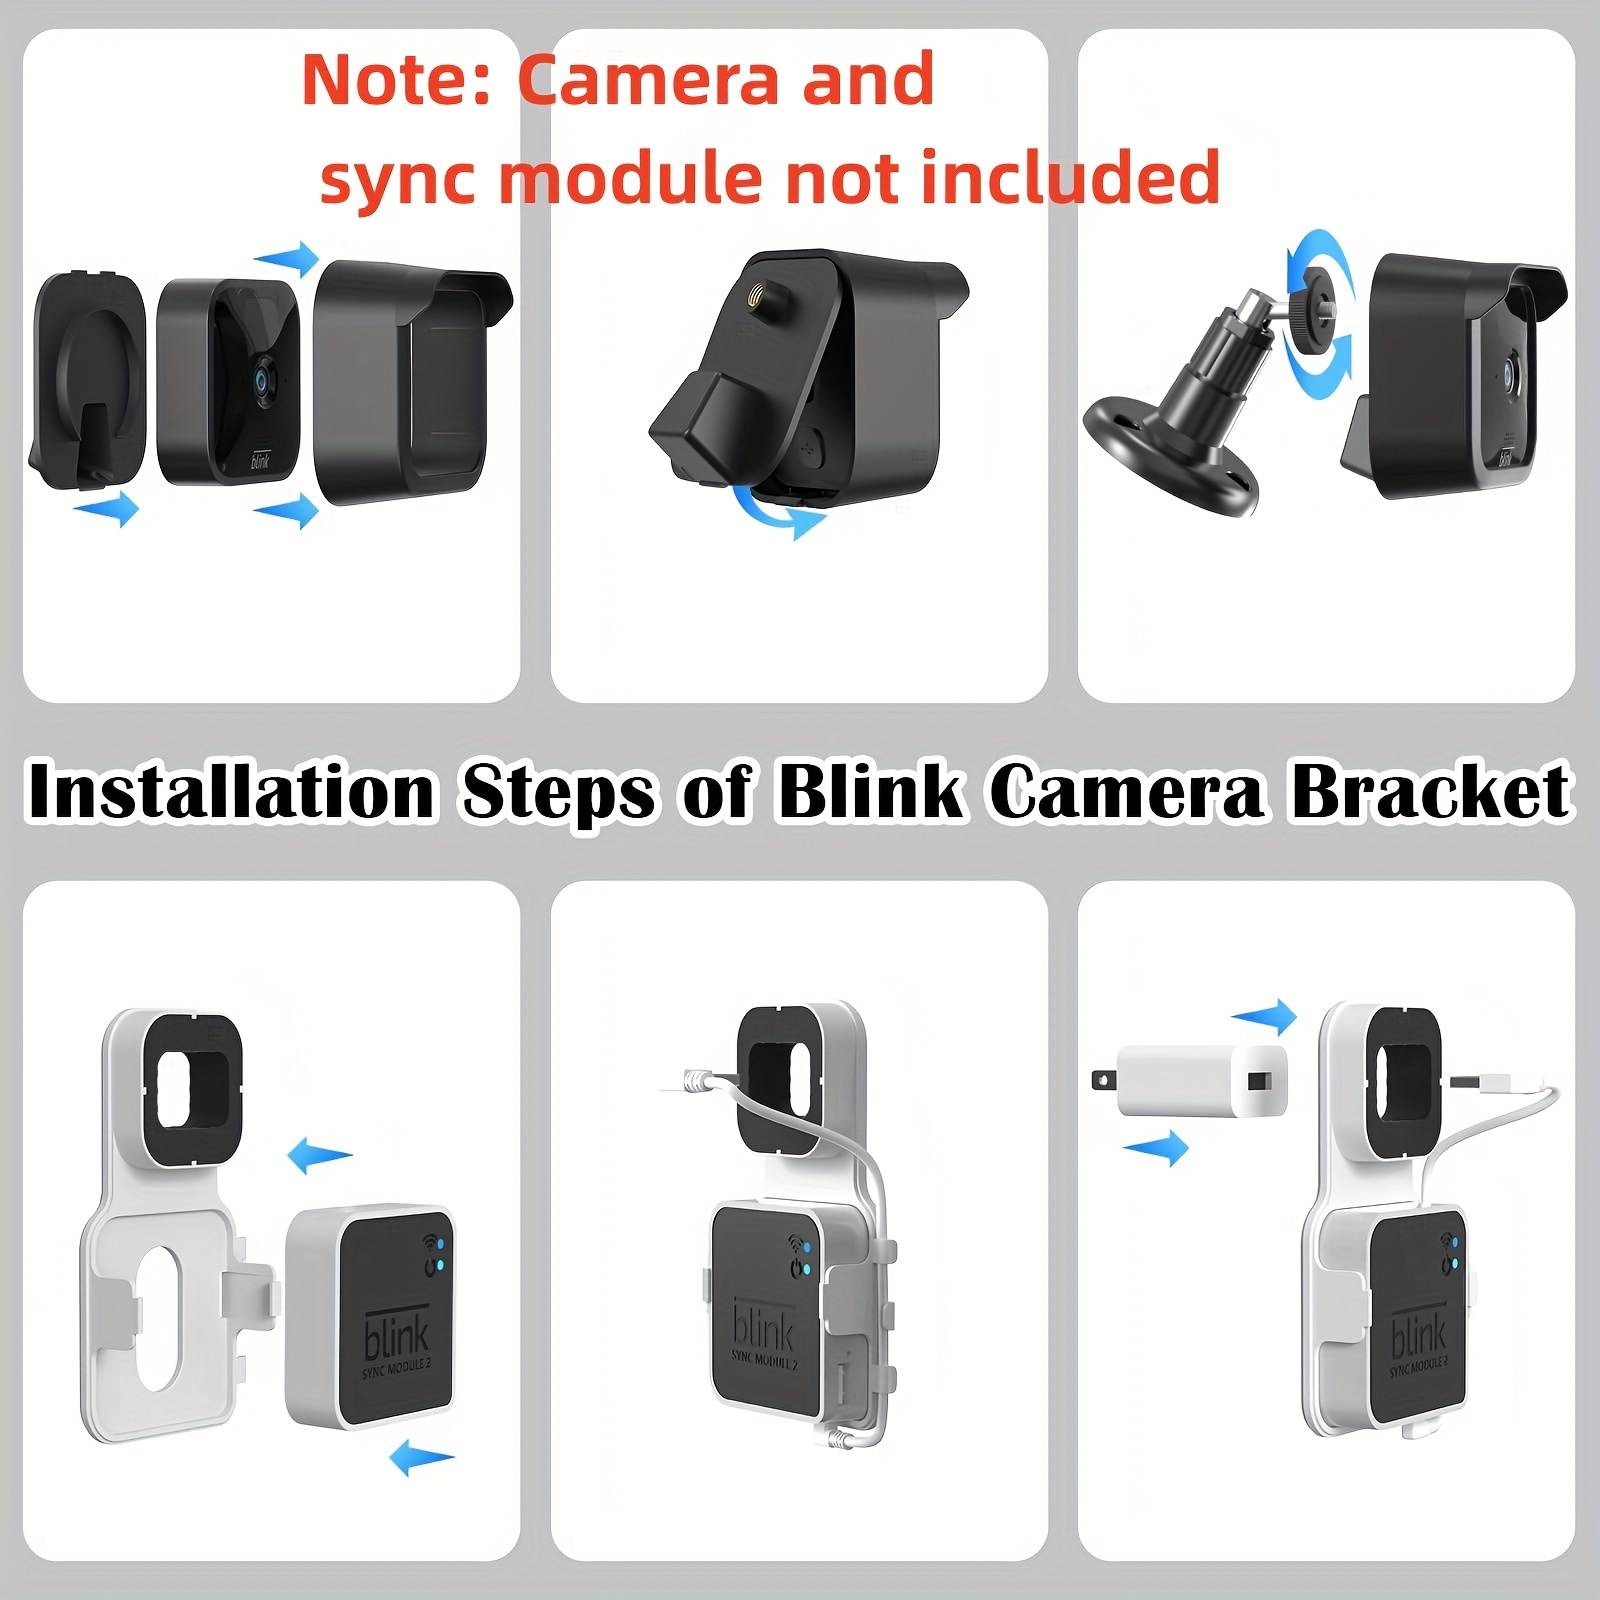  Outlet Wall Mount for Blink Sync Module 2, Mount